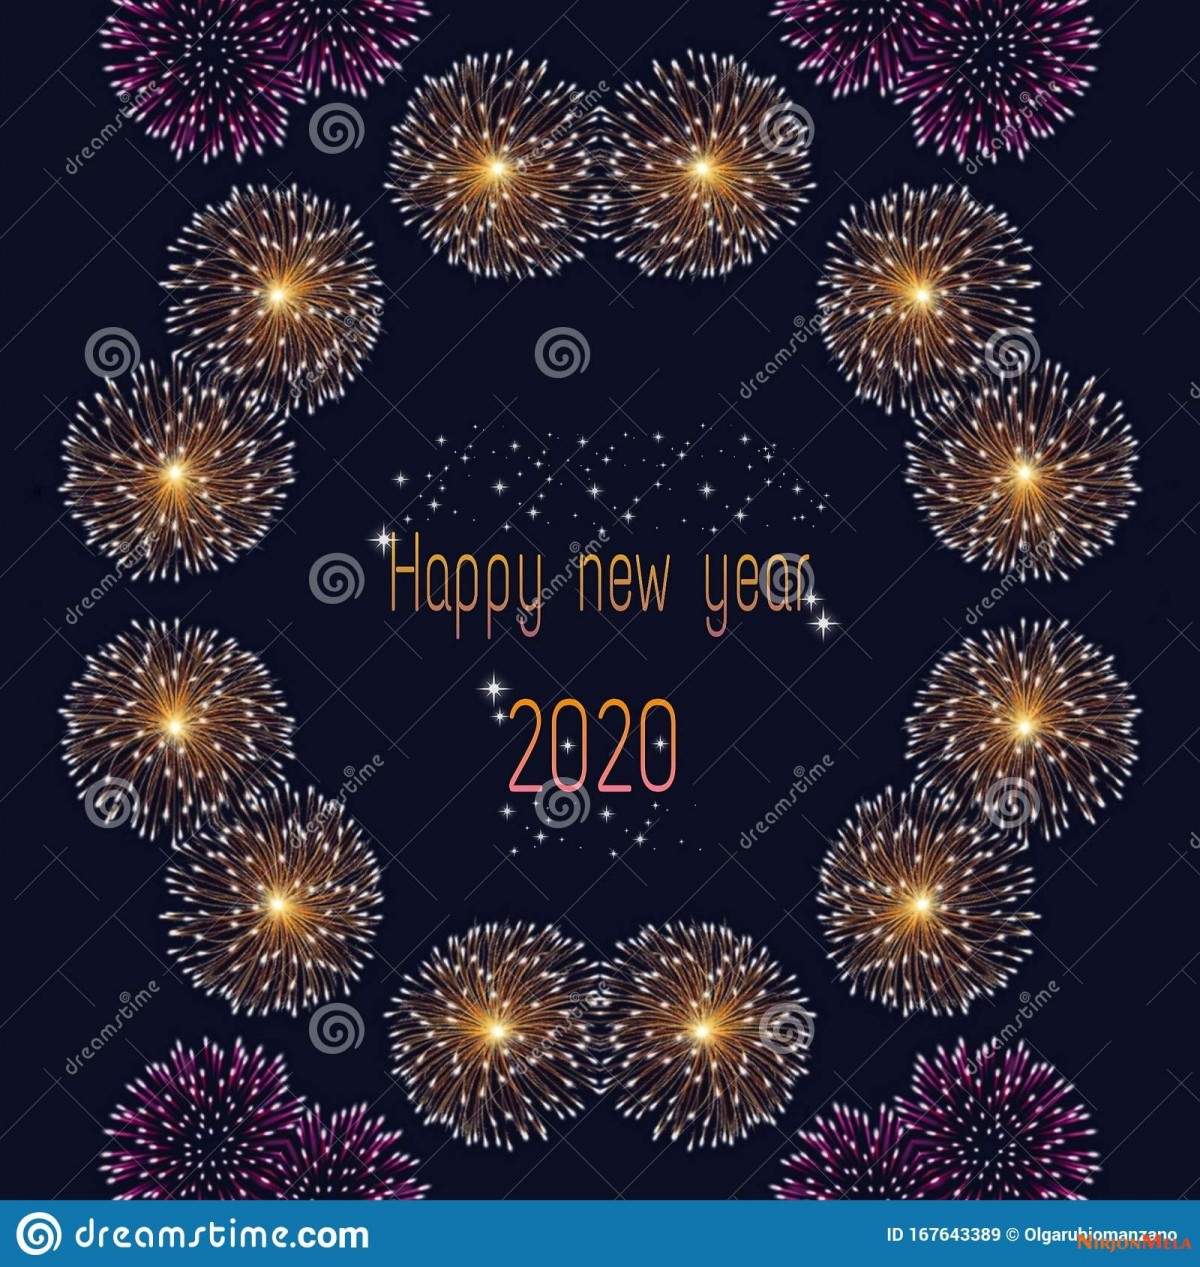 happy-new-year-card-sustainables-fireworks-isolated-black-background-167643389.jpg